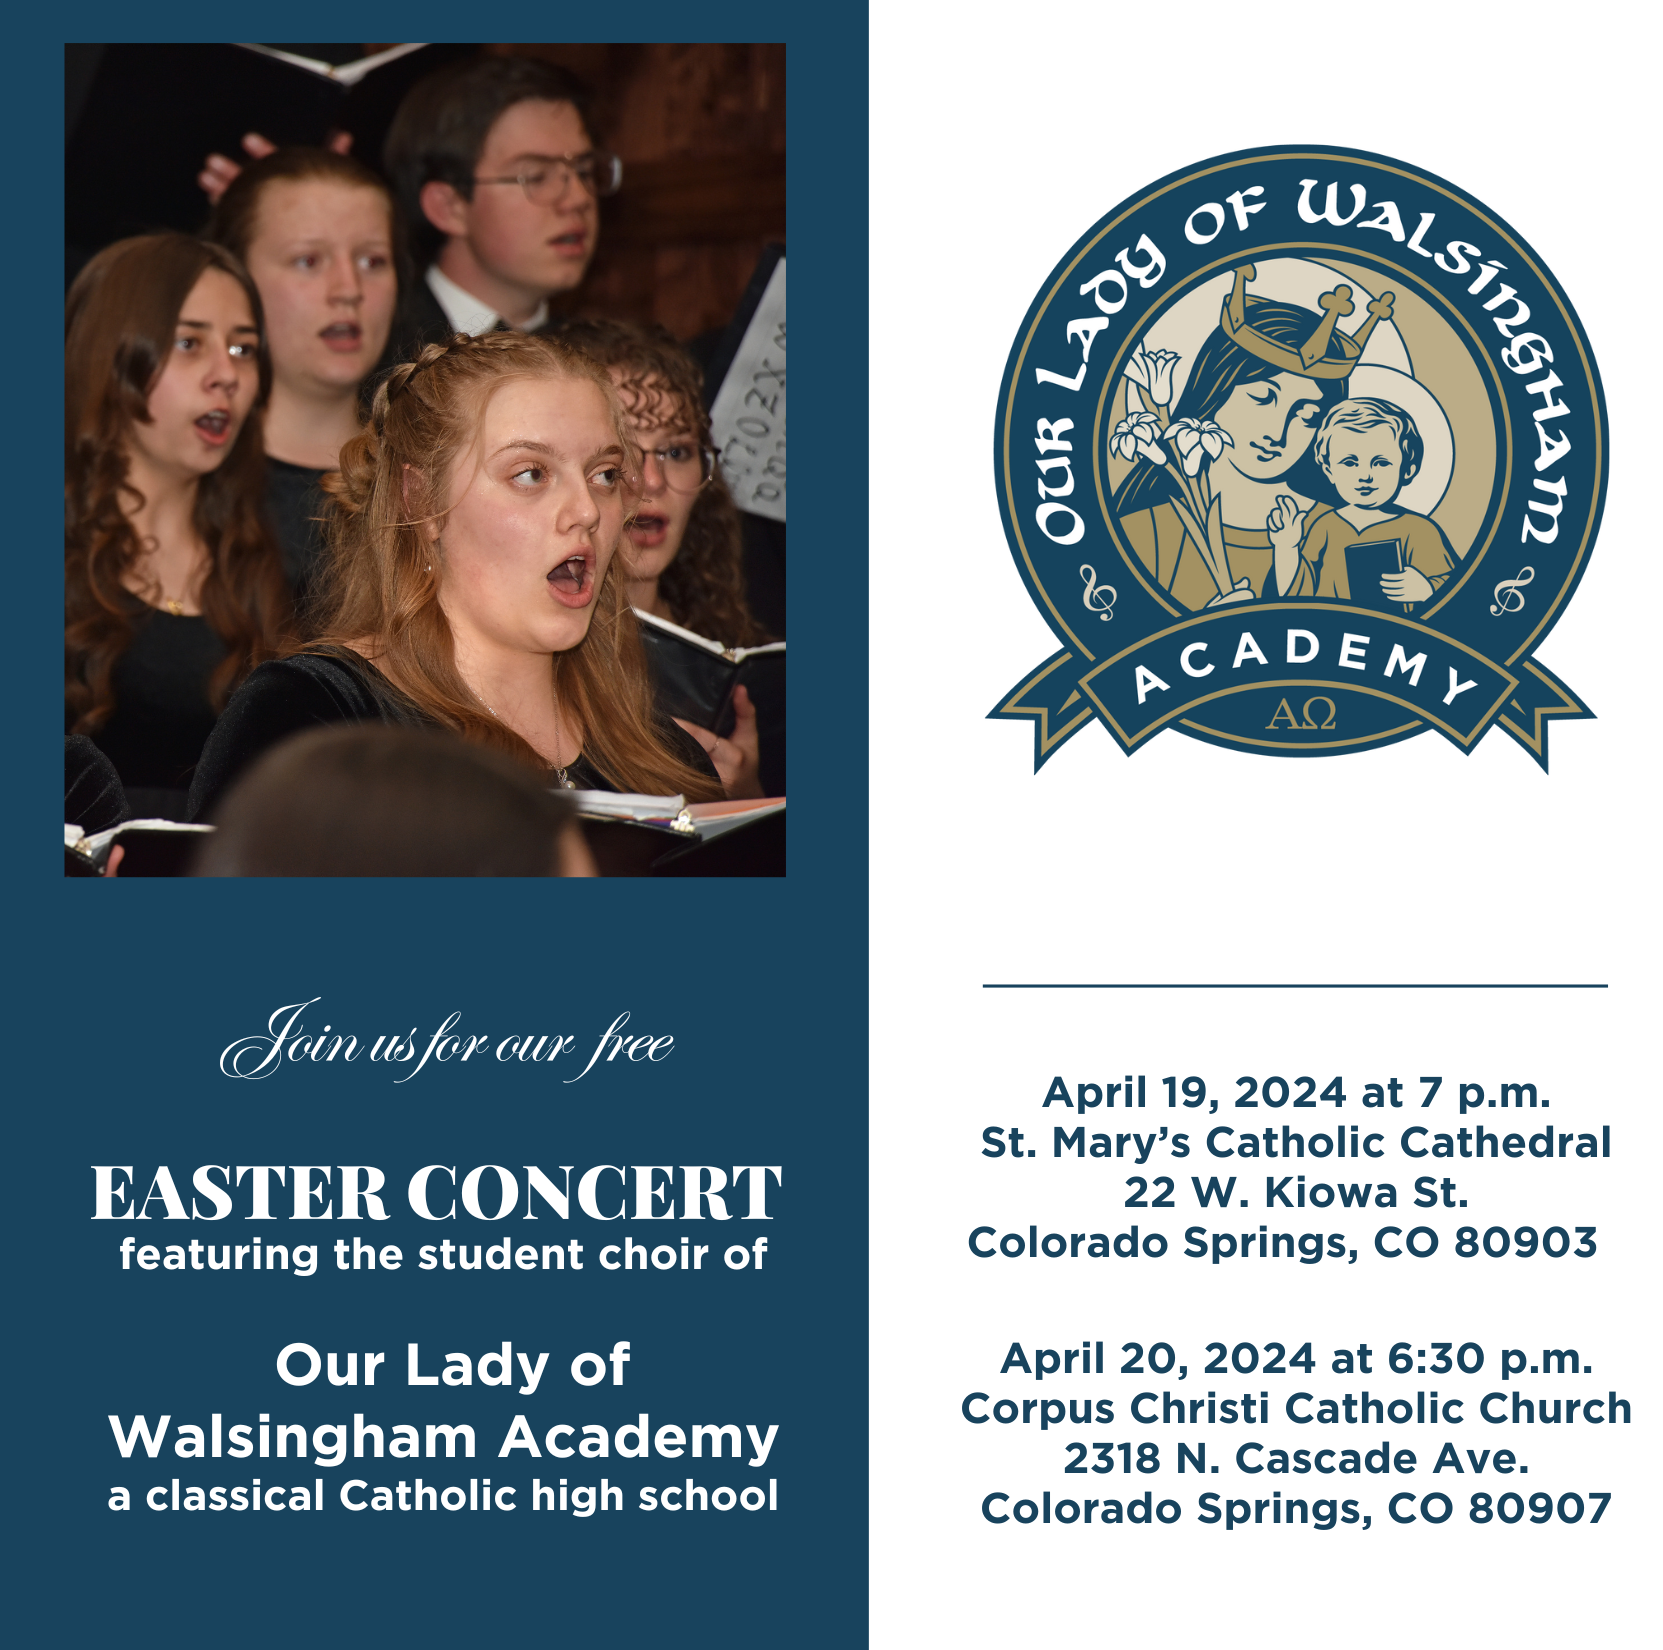 Easter Concert featuring the Student Choir of Our Lady of Walsingham Academy